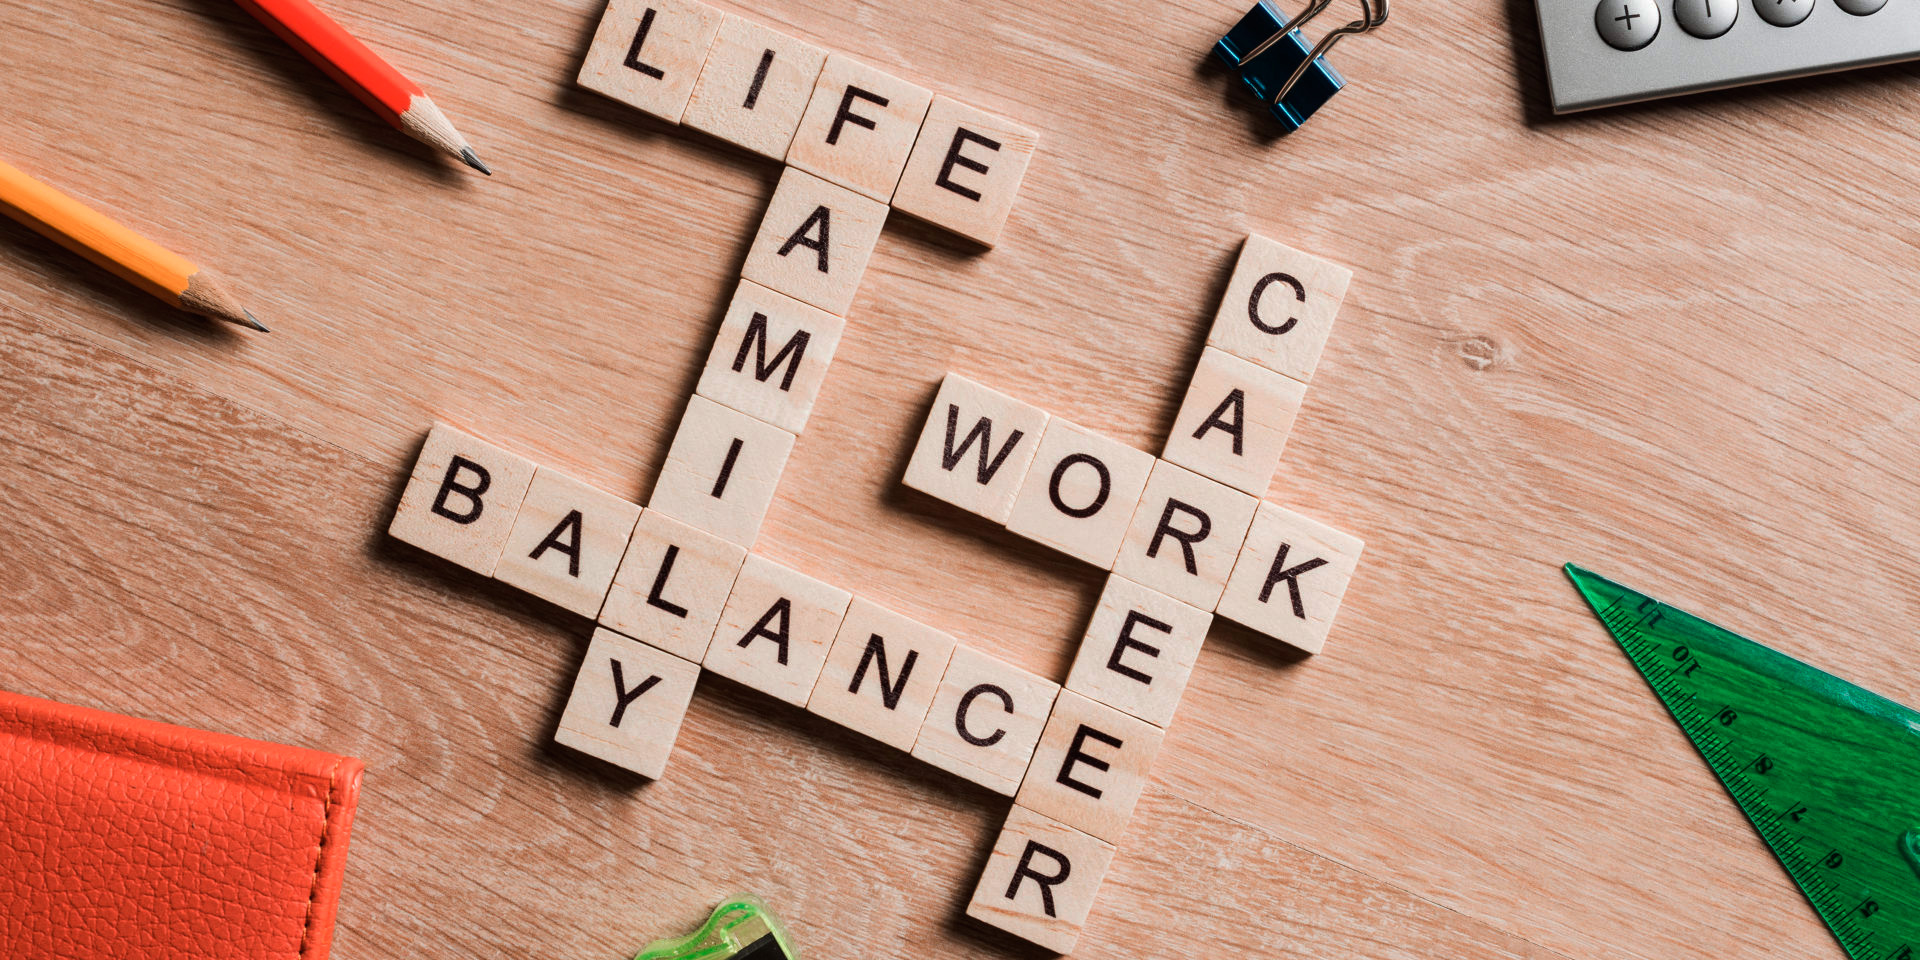 What Are Some Tips For Achieving Work-Life Balance As An Entrepreneur?